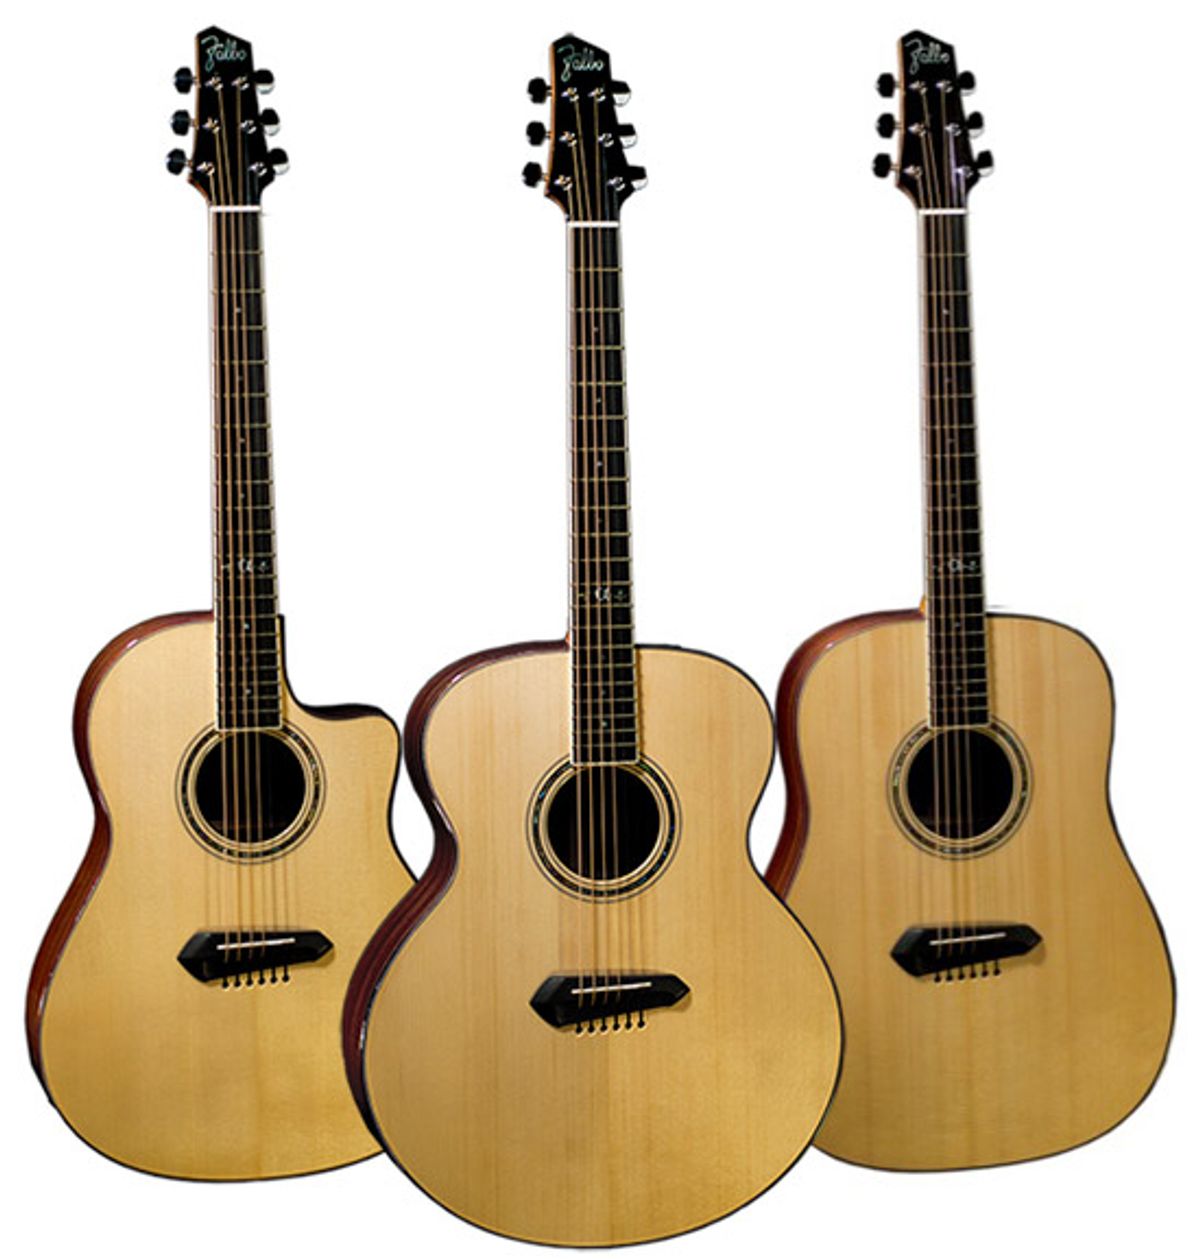 Falbo Guitars Launches with Alpha Series Acoustics